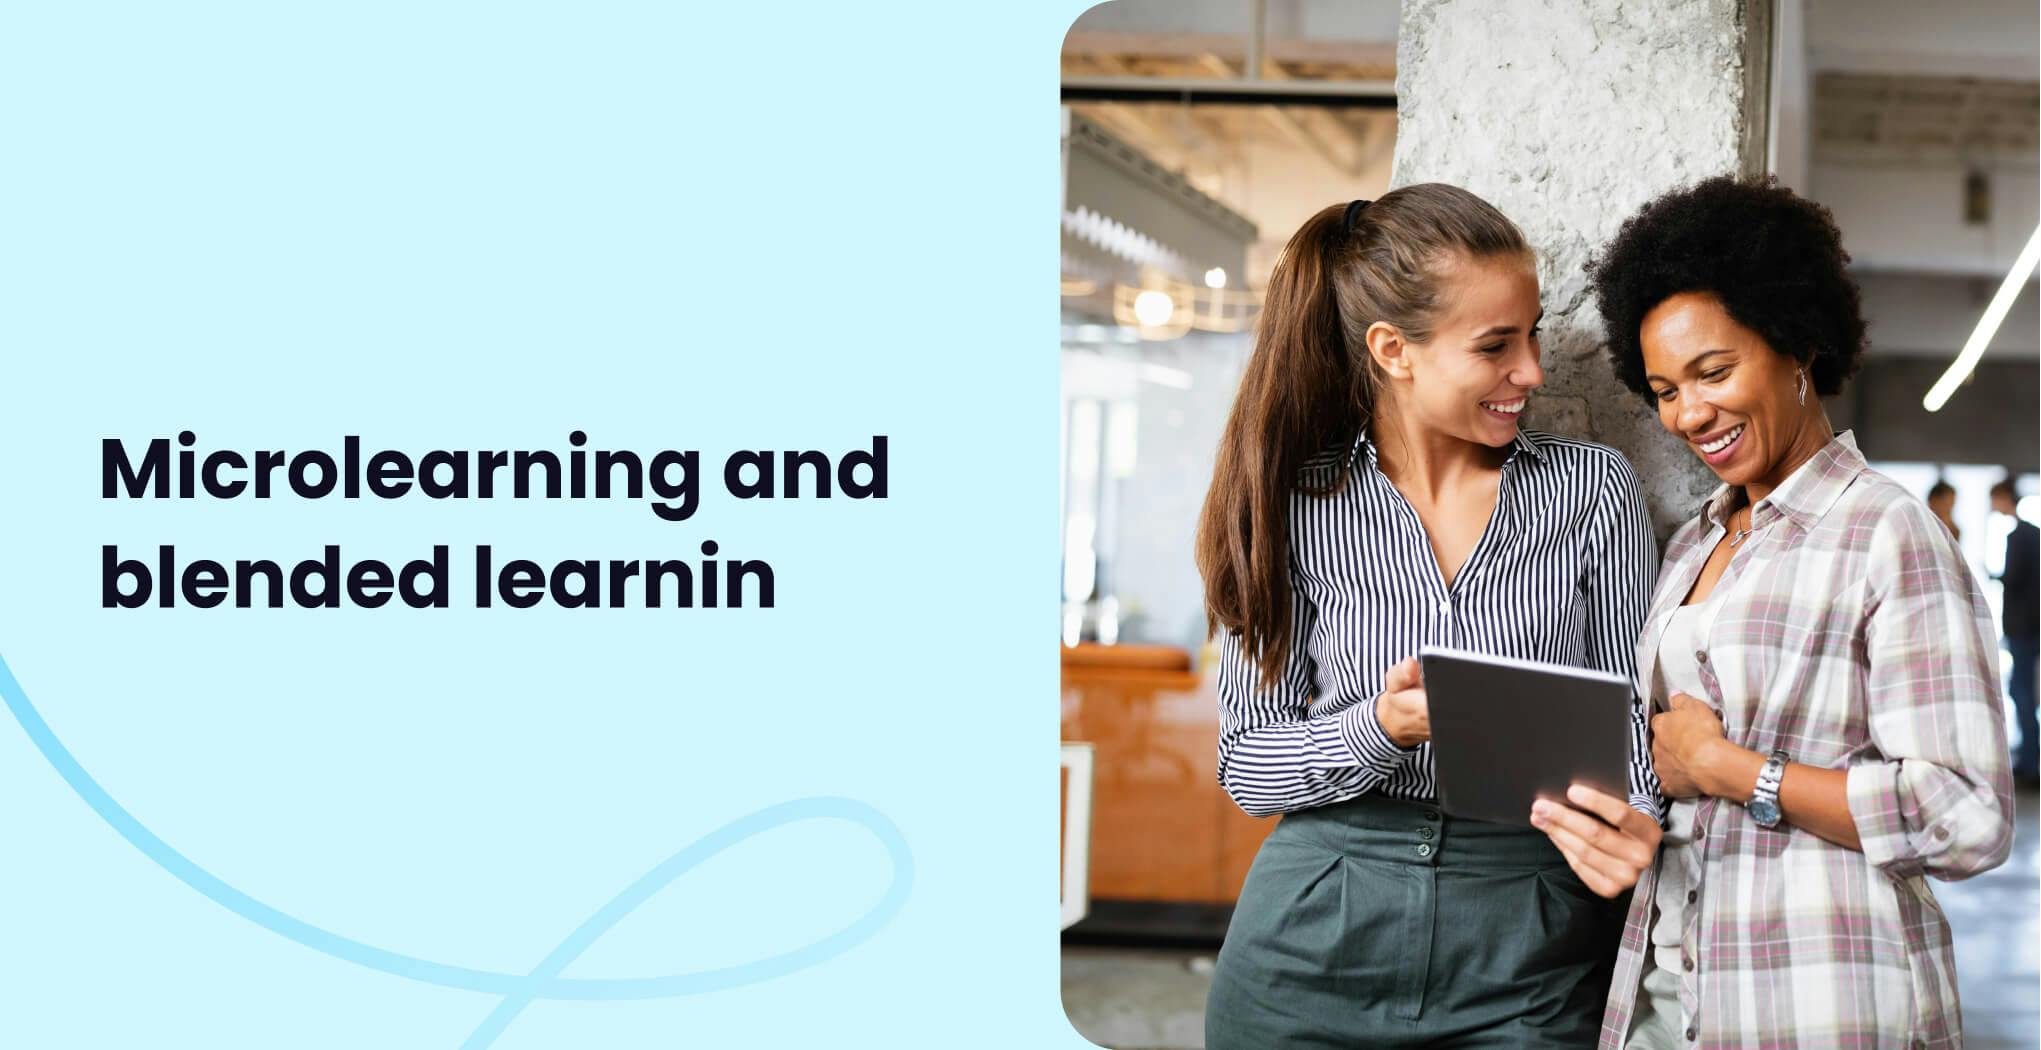 Microlearning and Blended Learning